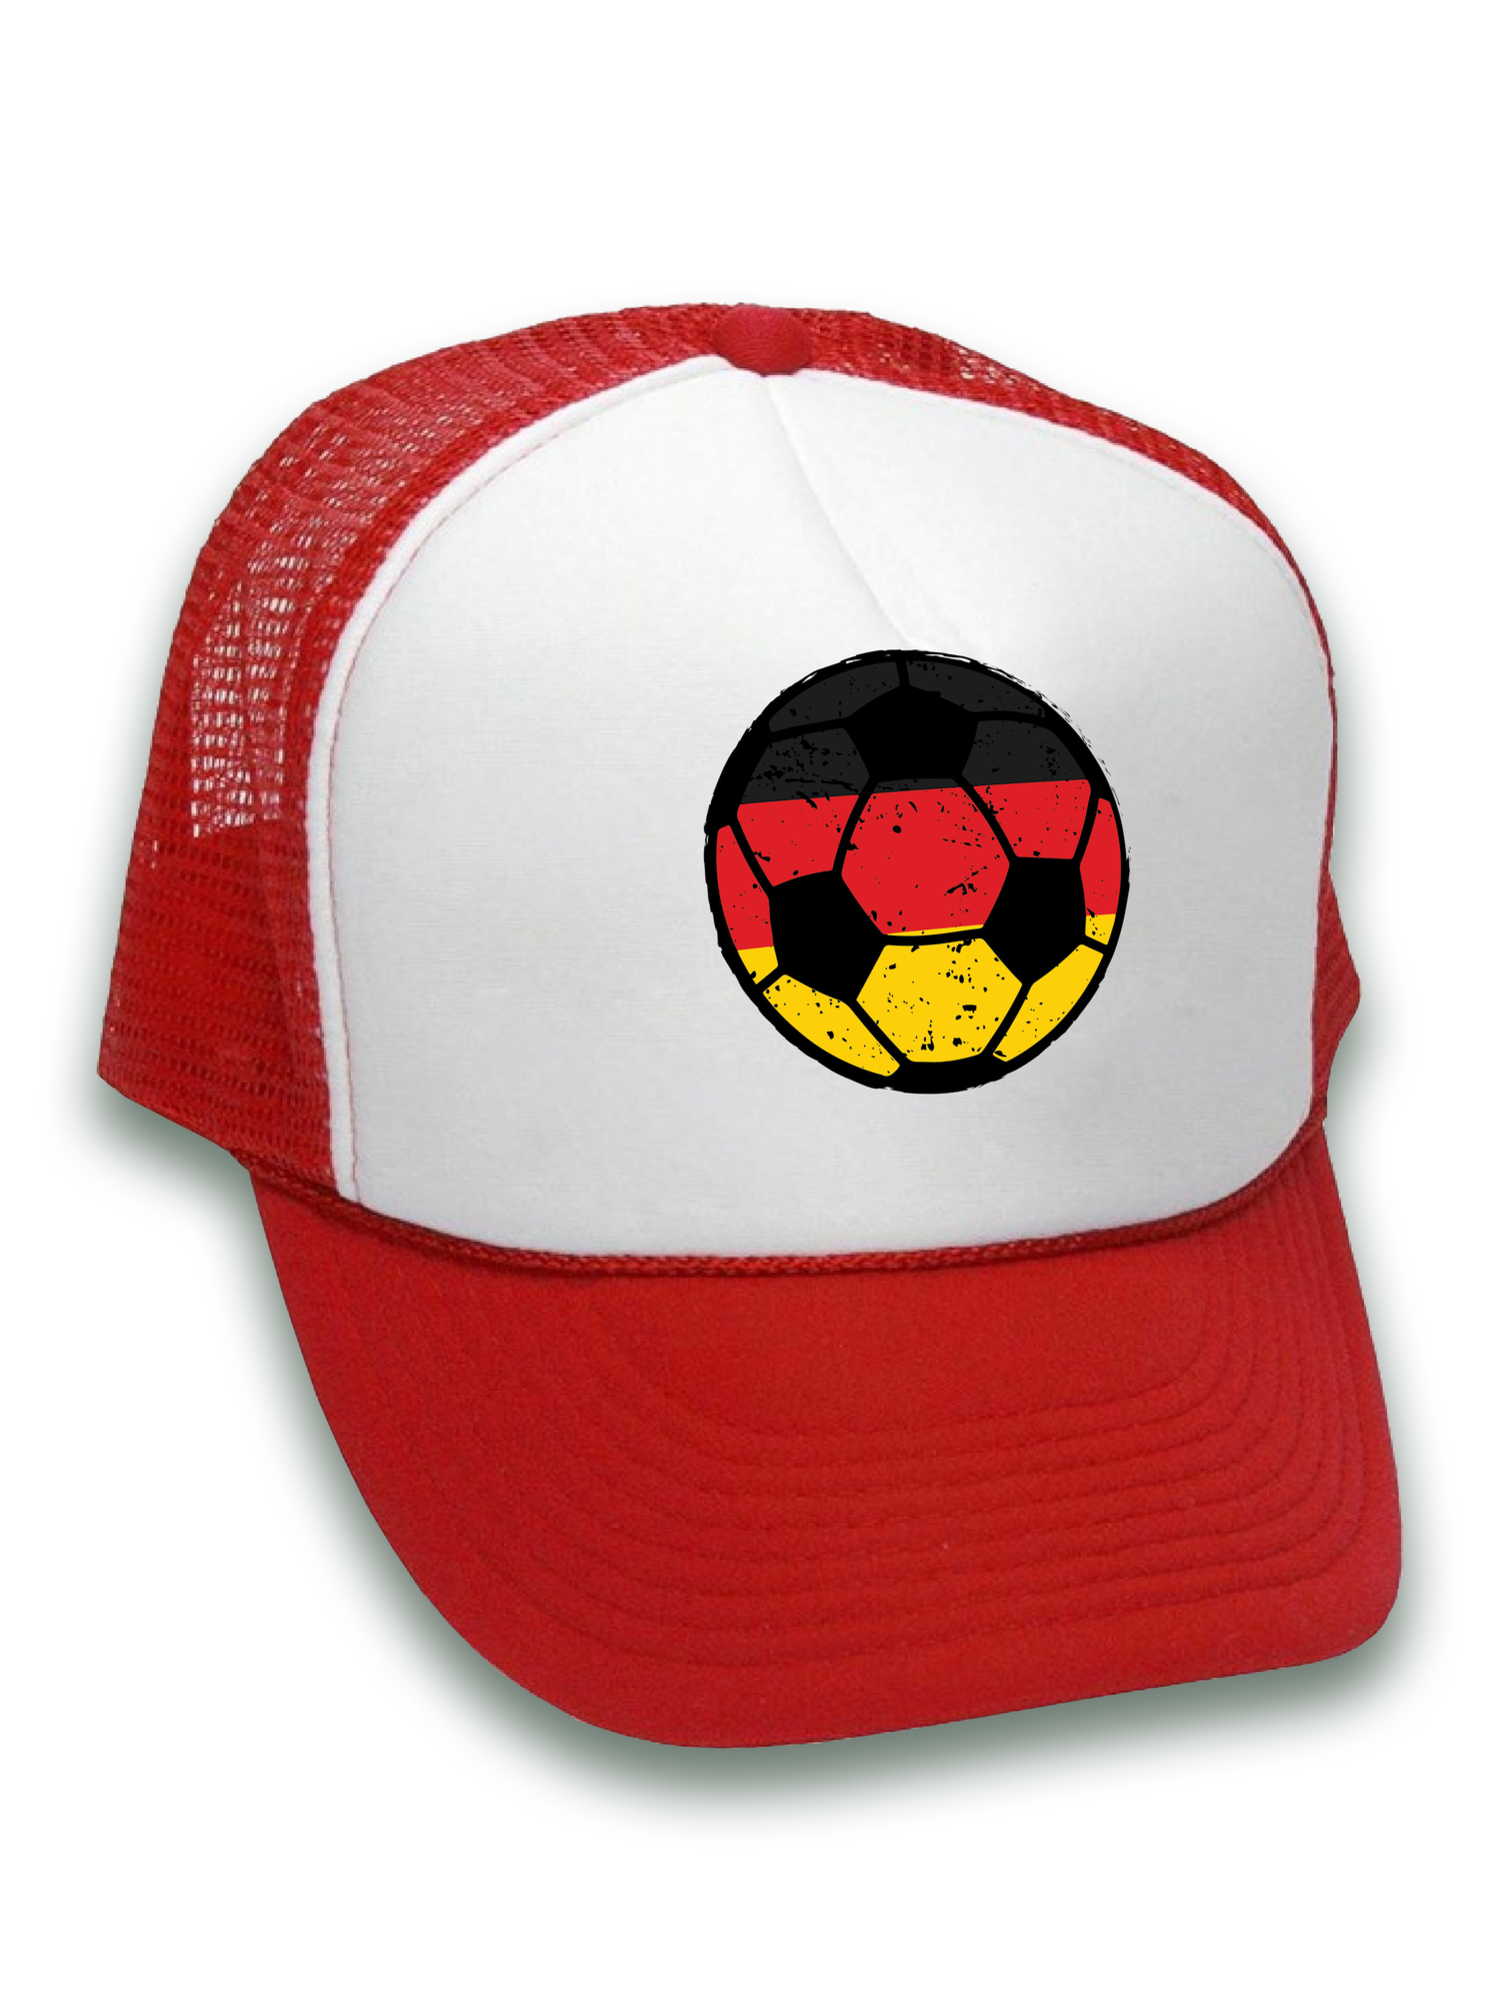 Awkward Styles Germany Soccer Ball Hat German Soccer Trucker Hat Germany 2018 Baseball Cap Germany Trucker Hats for Men and Women Hat Gifts from Germany German Baseball Hats German Flag Baseball Hat - image 2 of 6